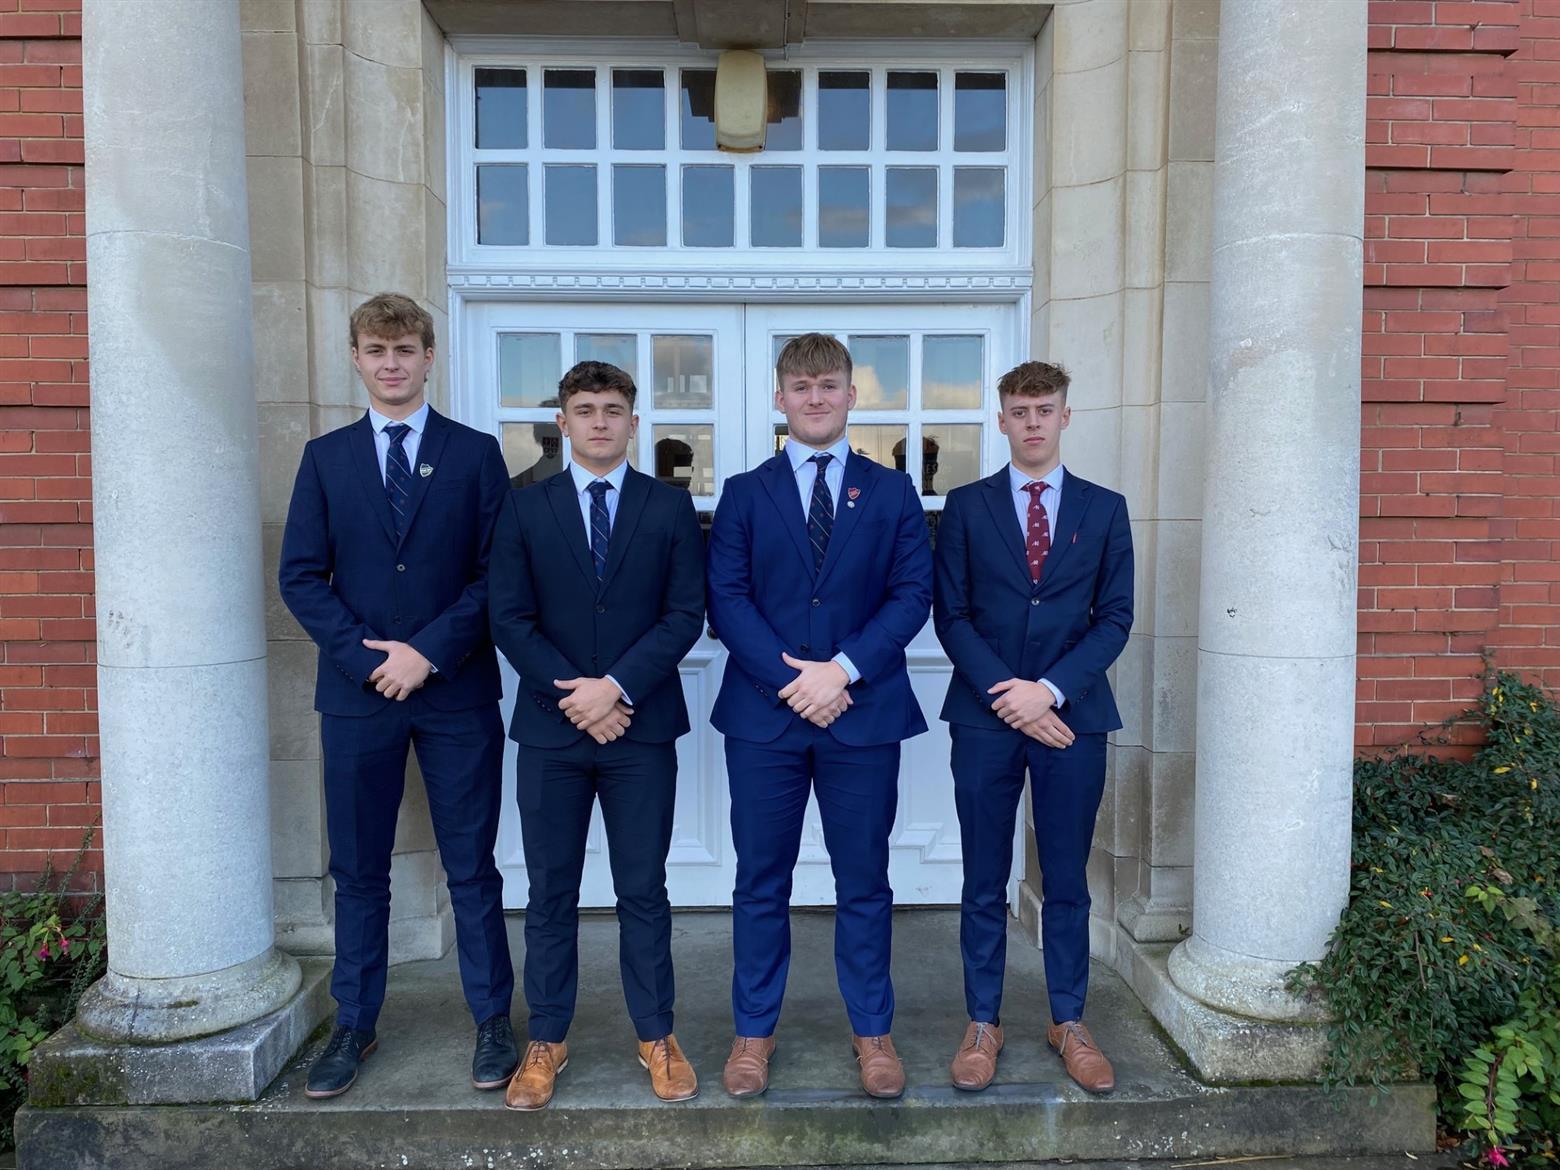 Four talented Sixth Form students selected for Lancashire Rugby U18 squad